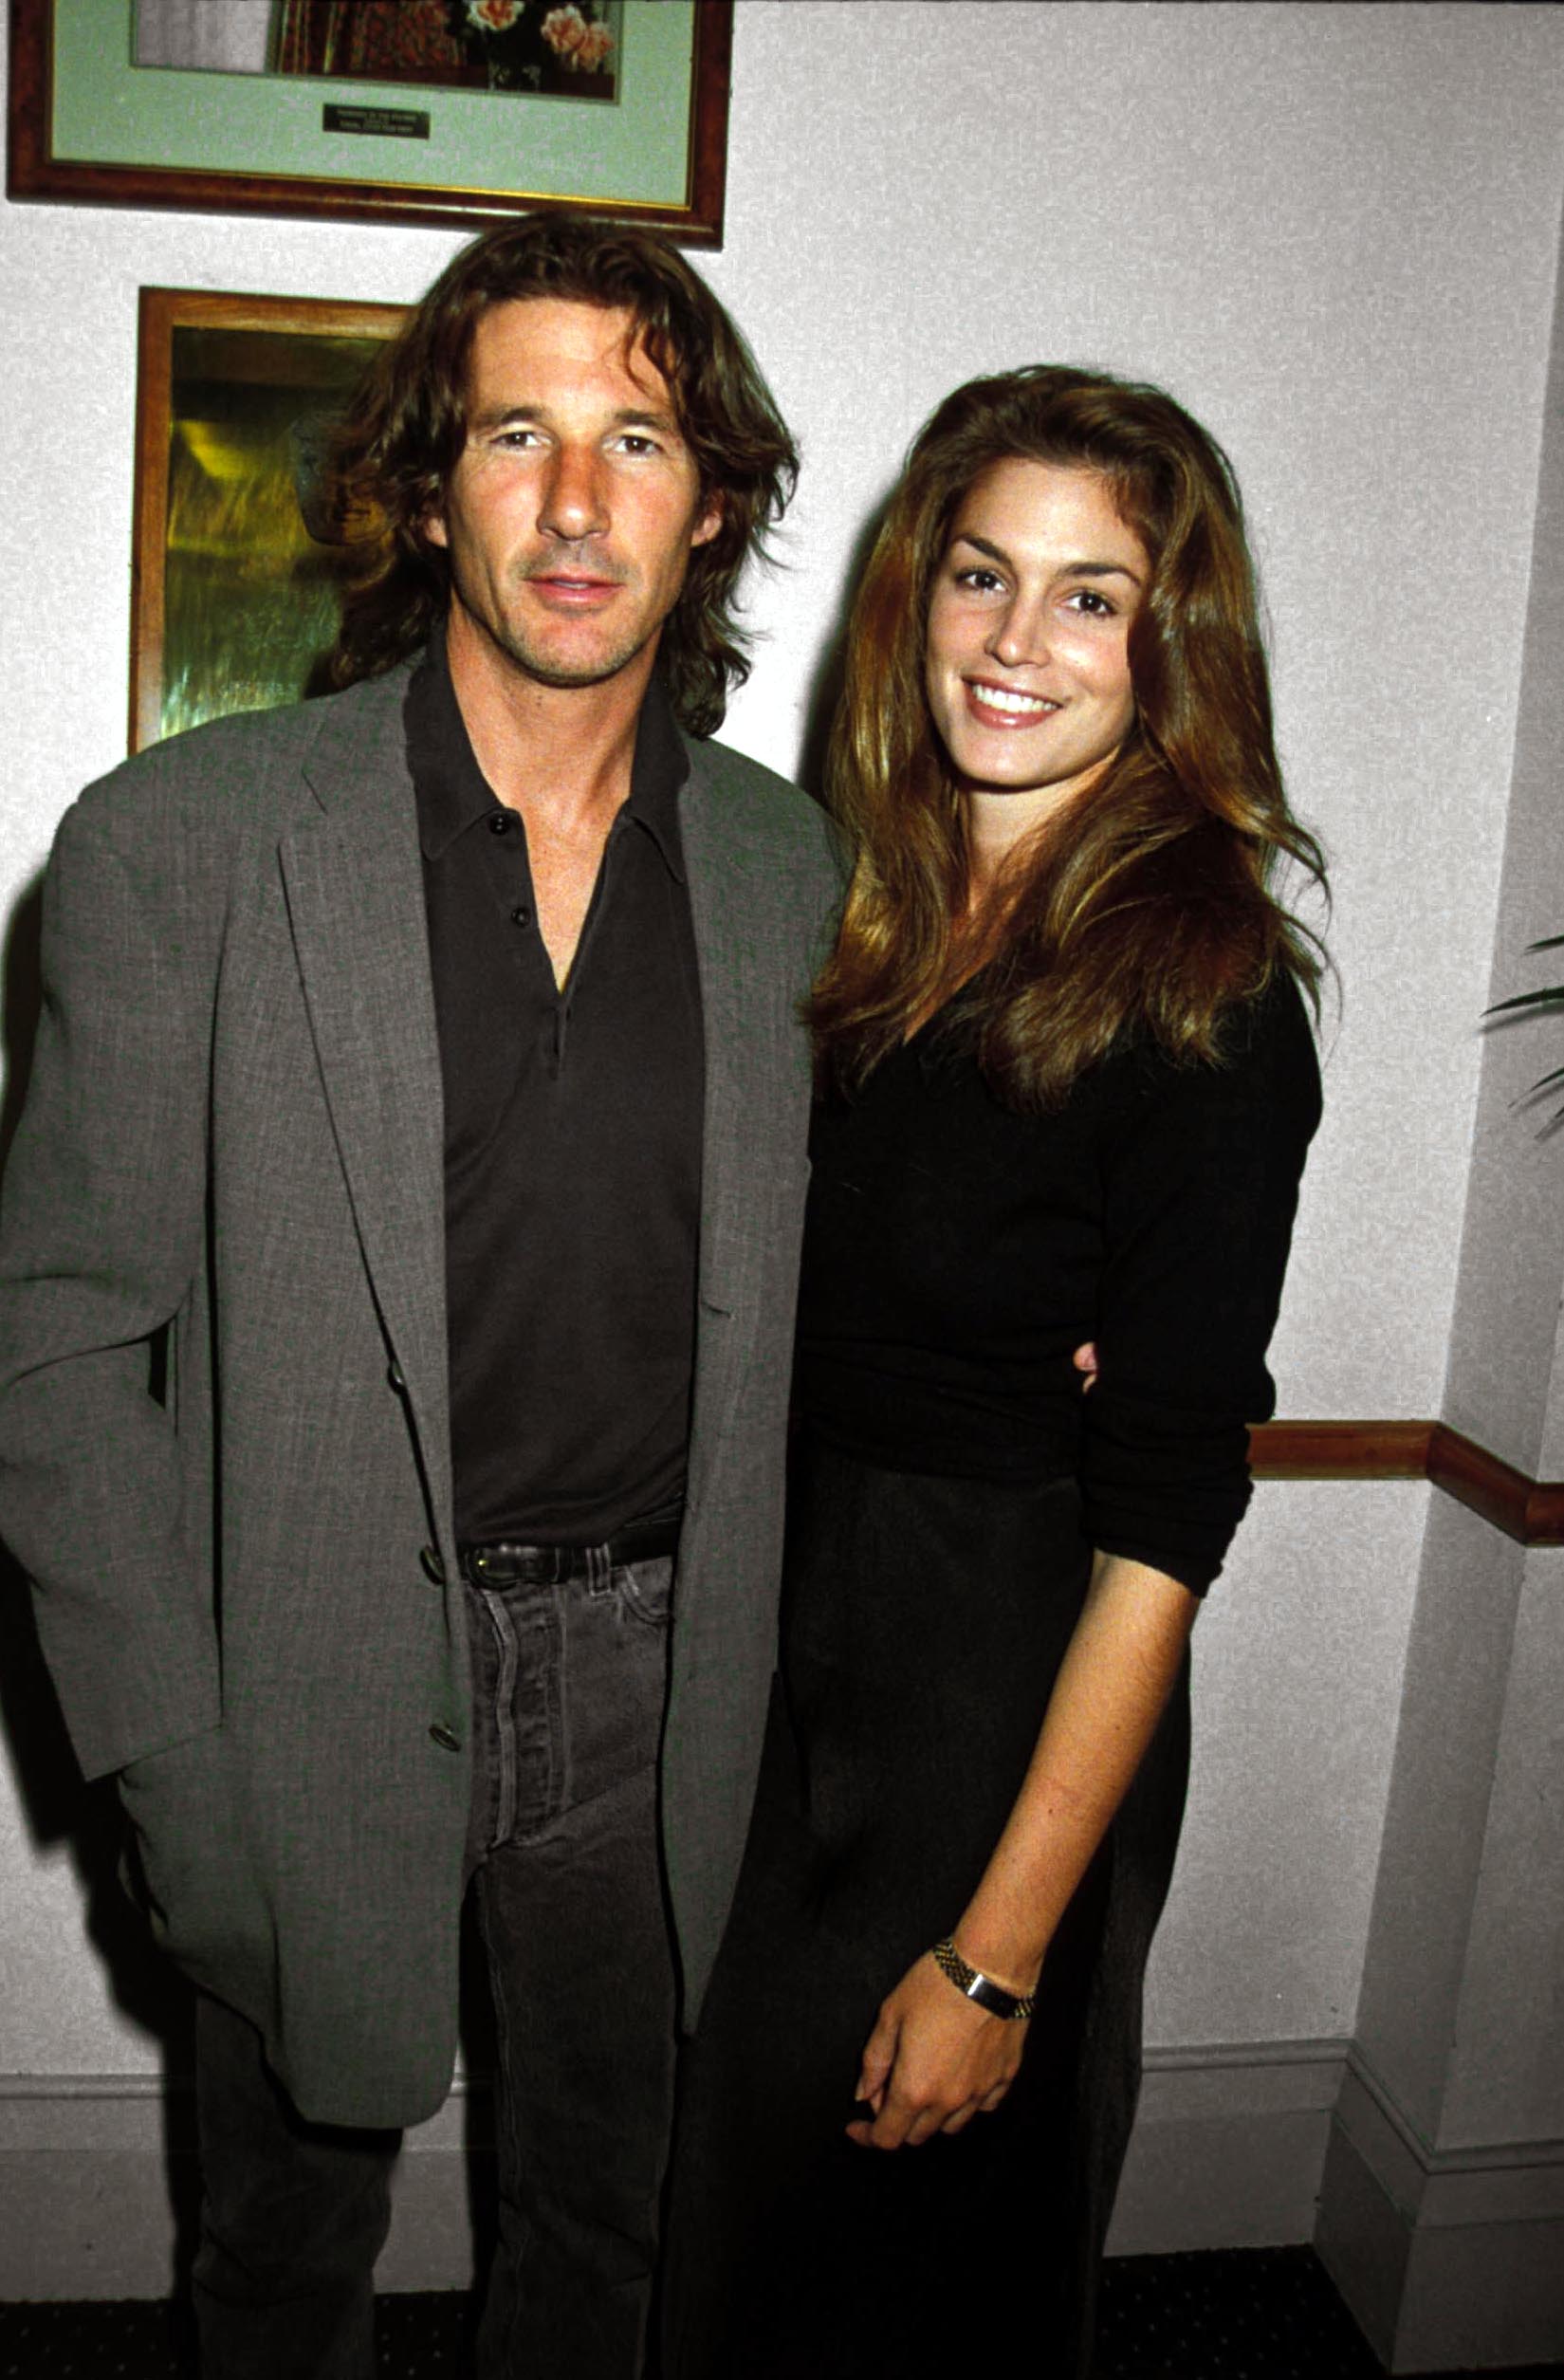 Cindy Crawford and Richard Gere  attend the "Mr Jones Premiere" circa 1991. | Source: Getty Images.